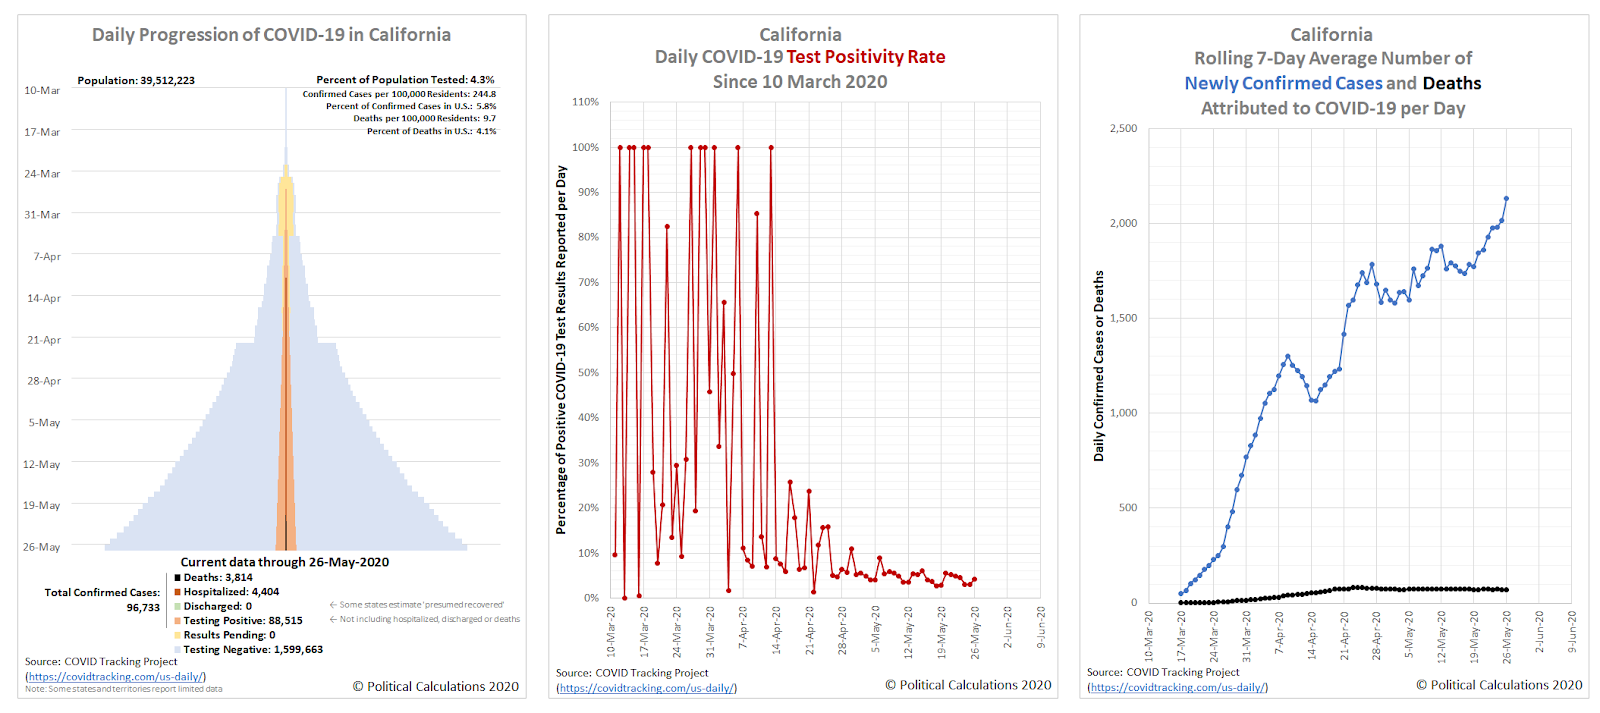 Progression of COVID-19 in California, Daily Test Positivity Rate, 7-Day Total Newly Confirmed Cases and Deaths per Day, 10 March 2020 through 26 May 2020